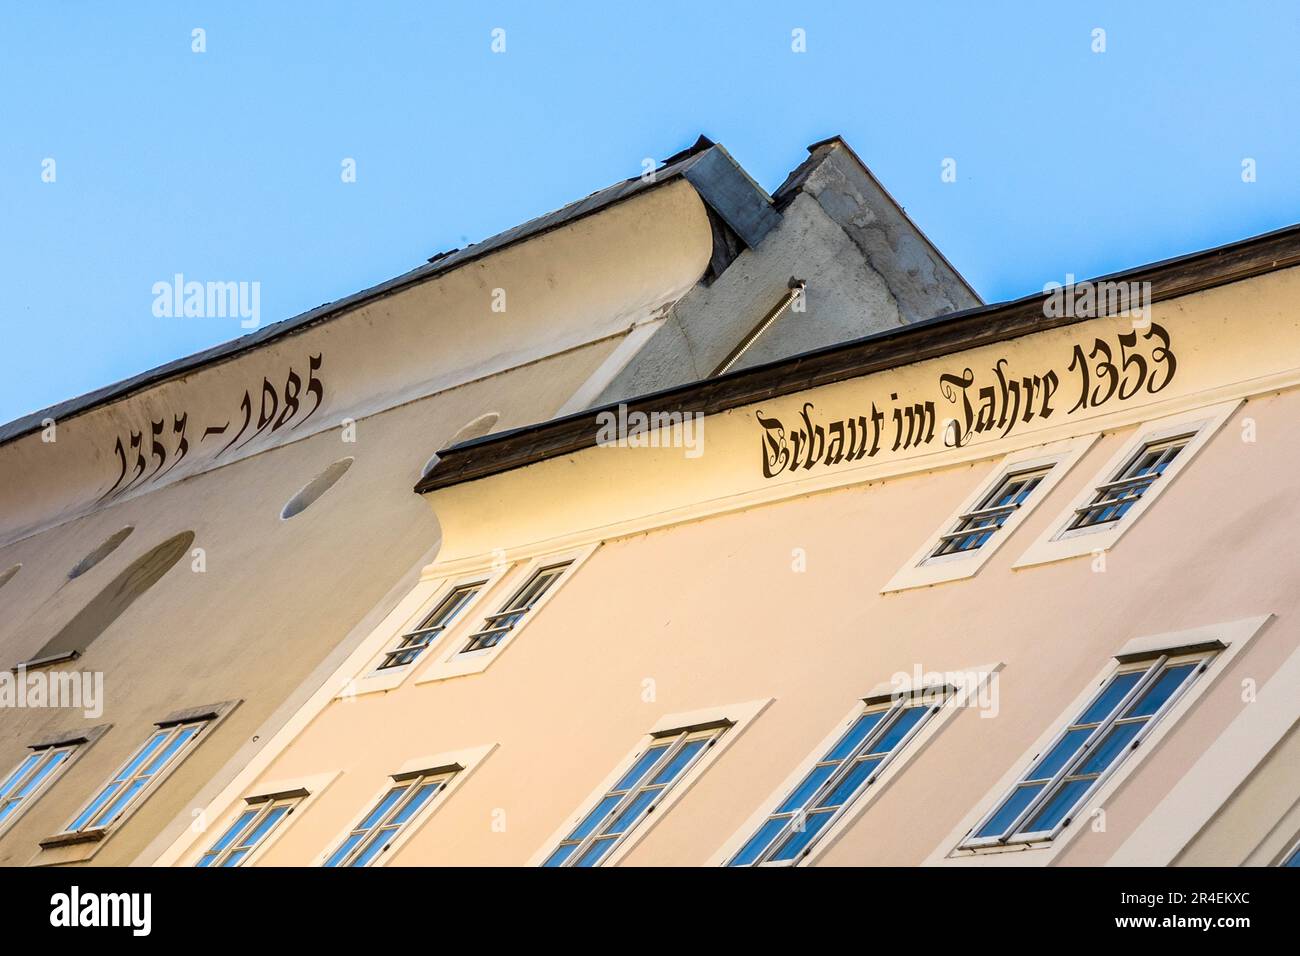 Typical for Salzburg, Austria: The year of construction is written under the roof overhangs of many buildings Stock Photo